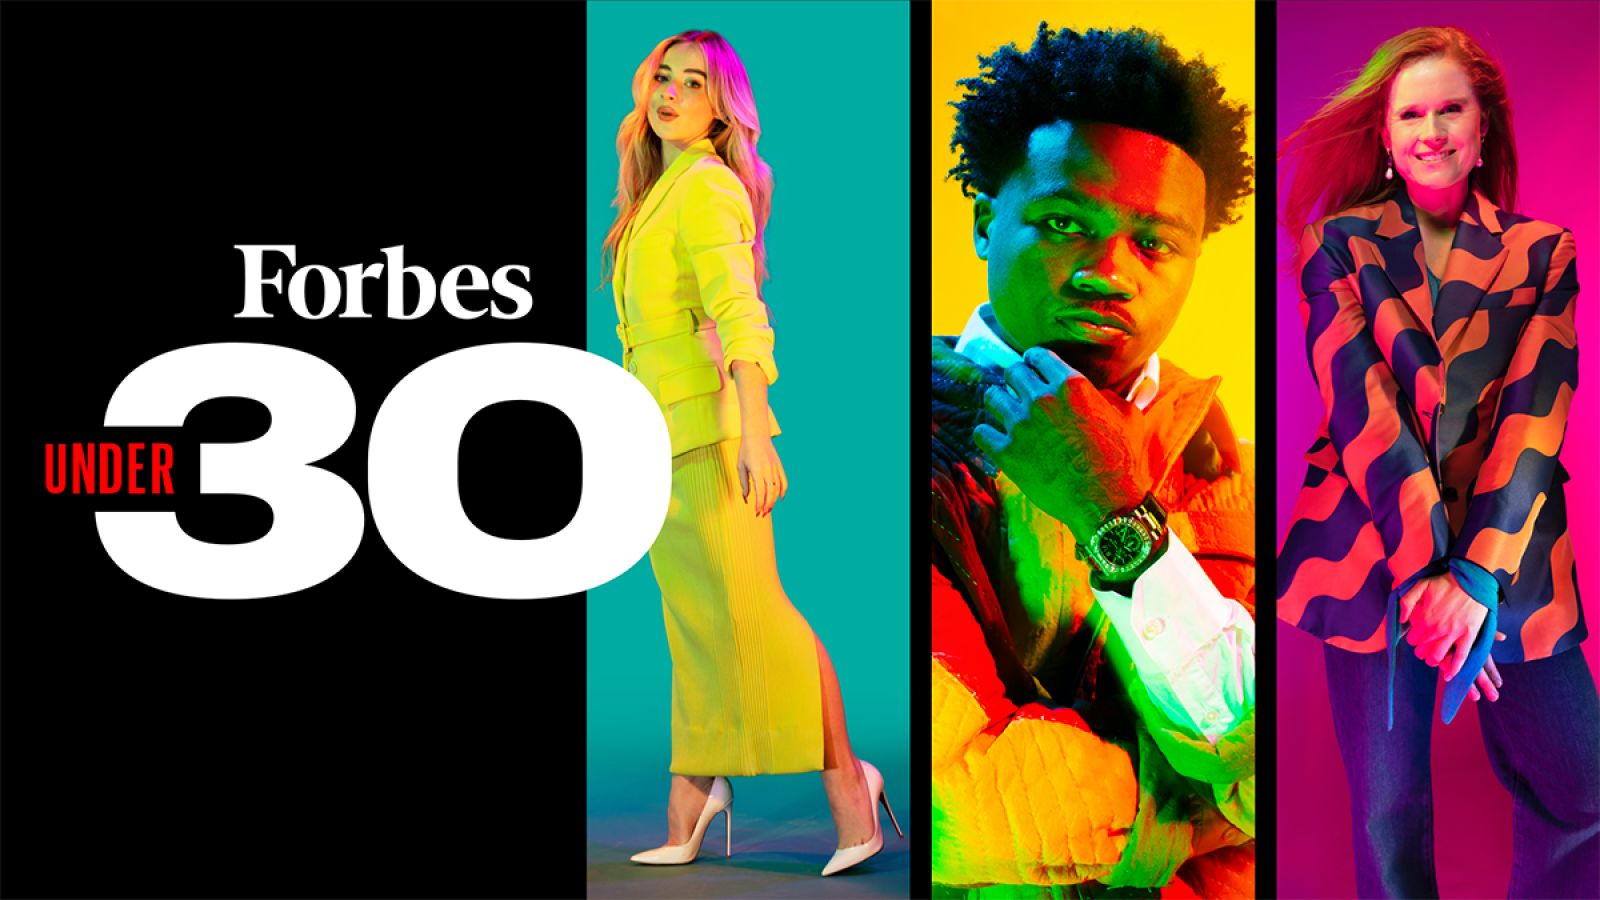 Forbes’ annual 30 Under 30 list